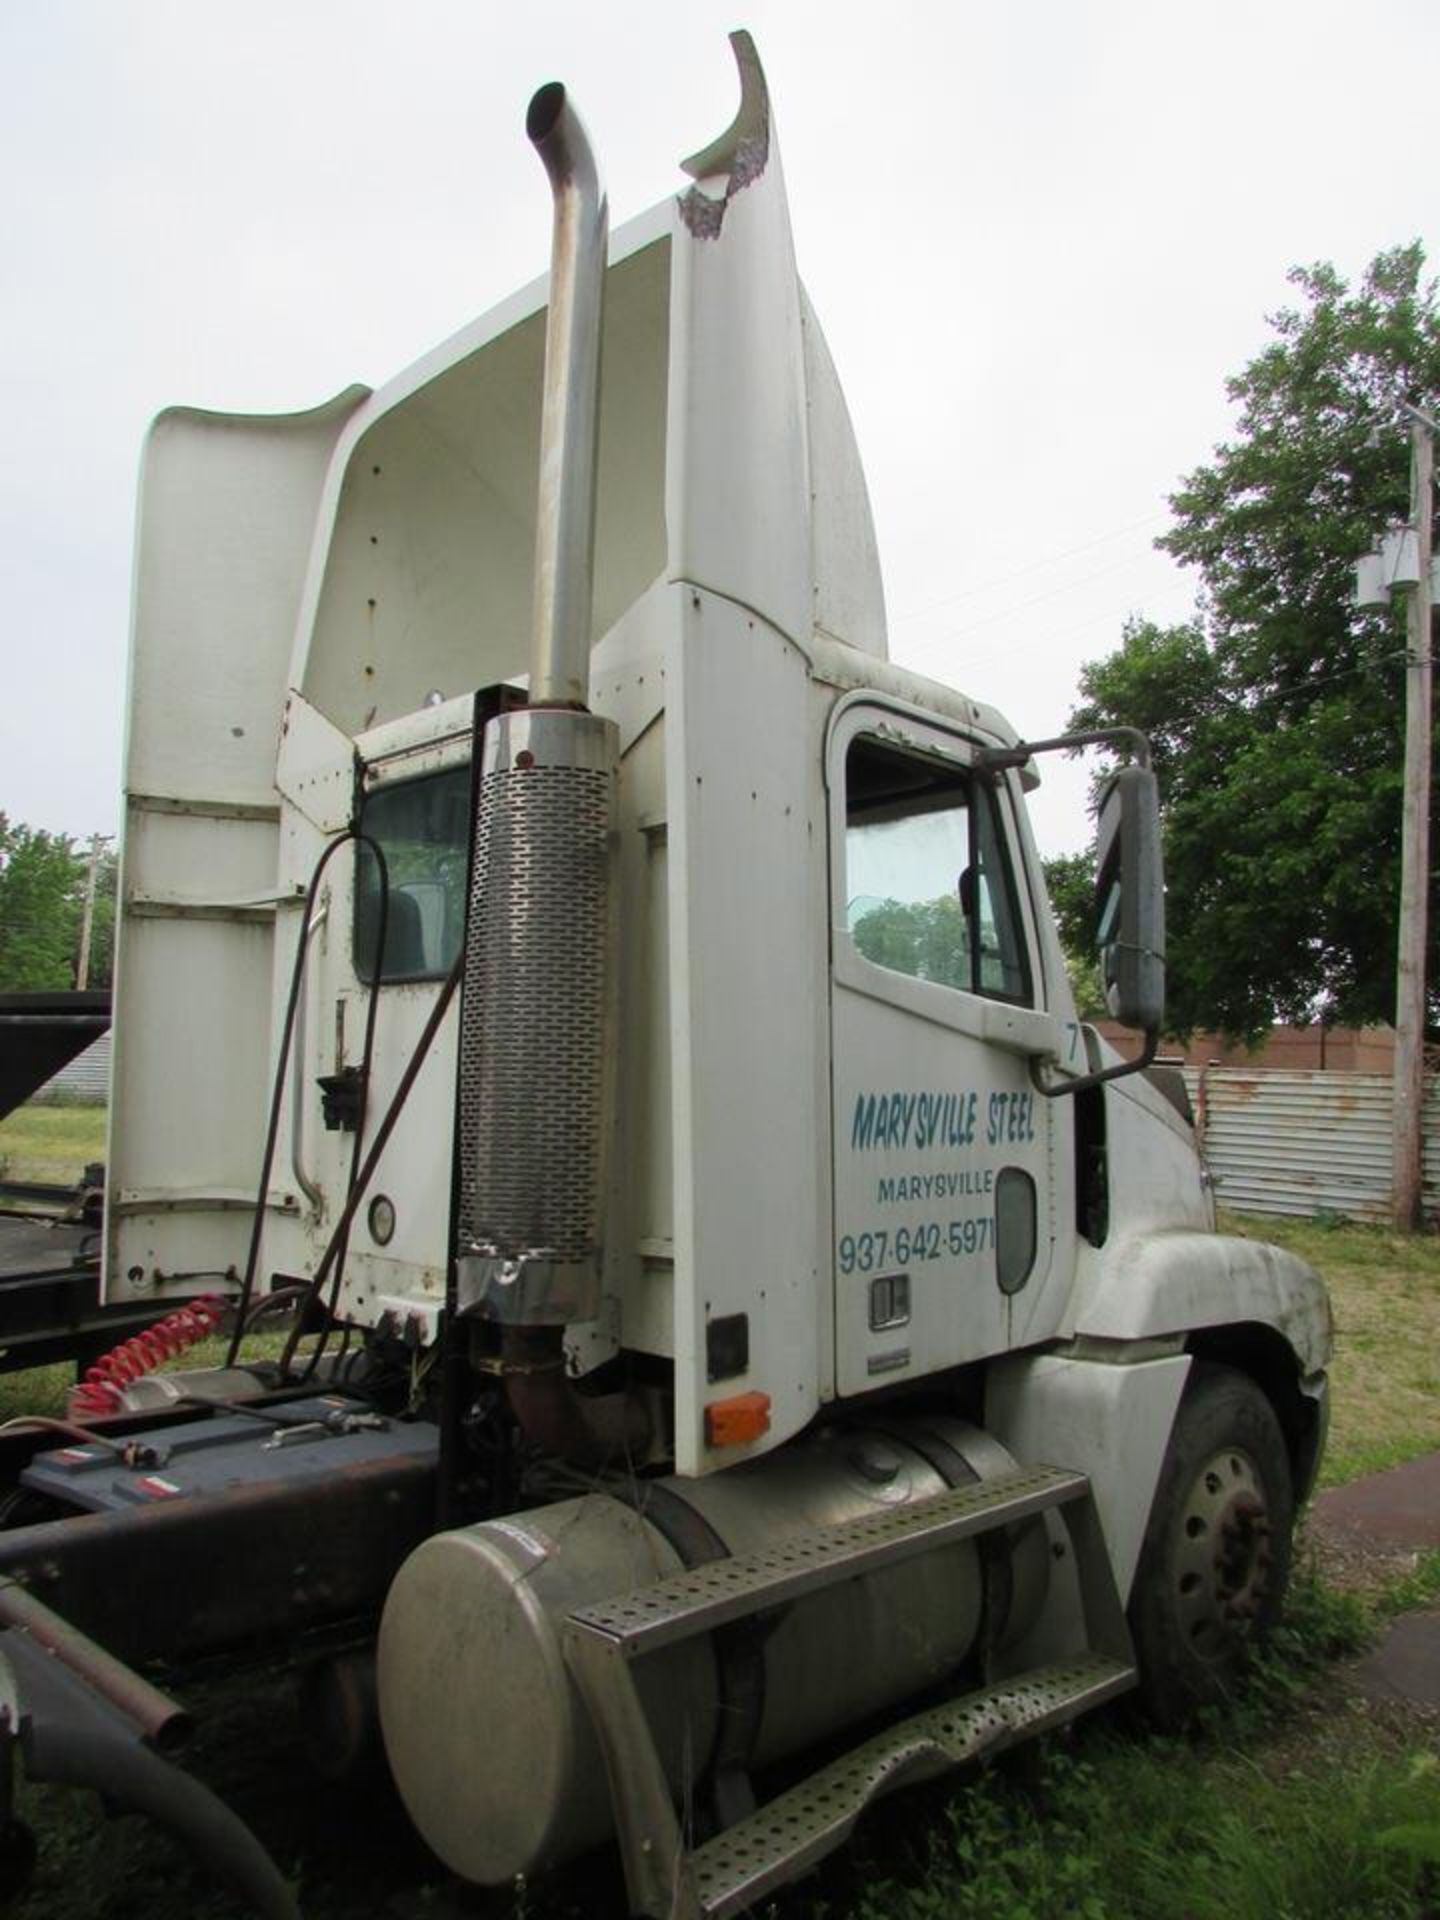 2002 Freightliner Century Class Day Cab Truck Tractor, 52,000 GVWR, Eaton Fuller 10-Speed Manual - Image 11 of 20